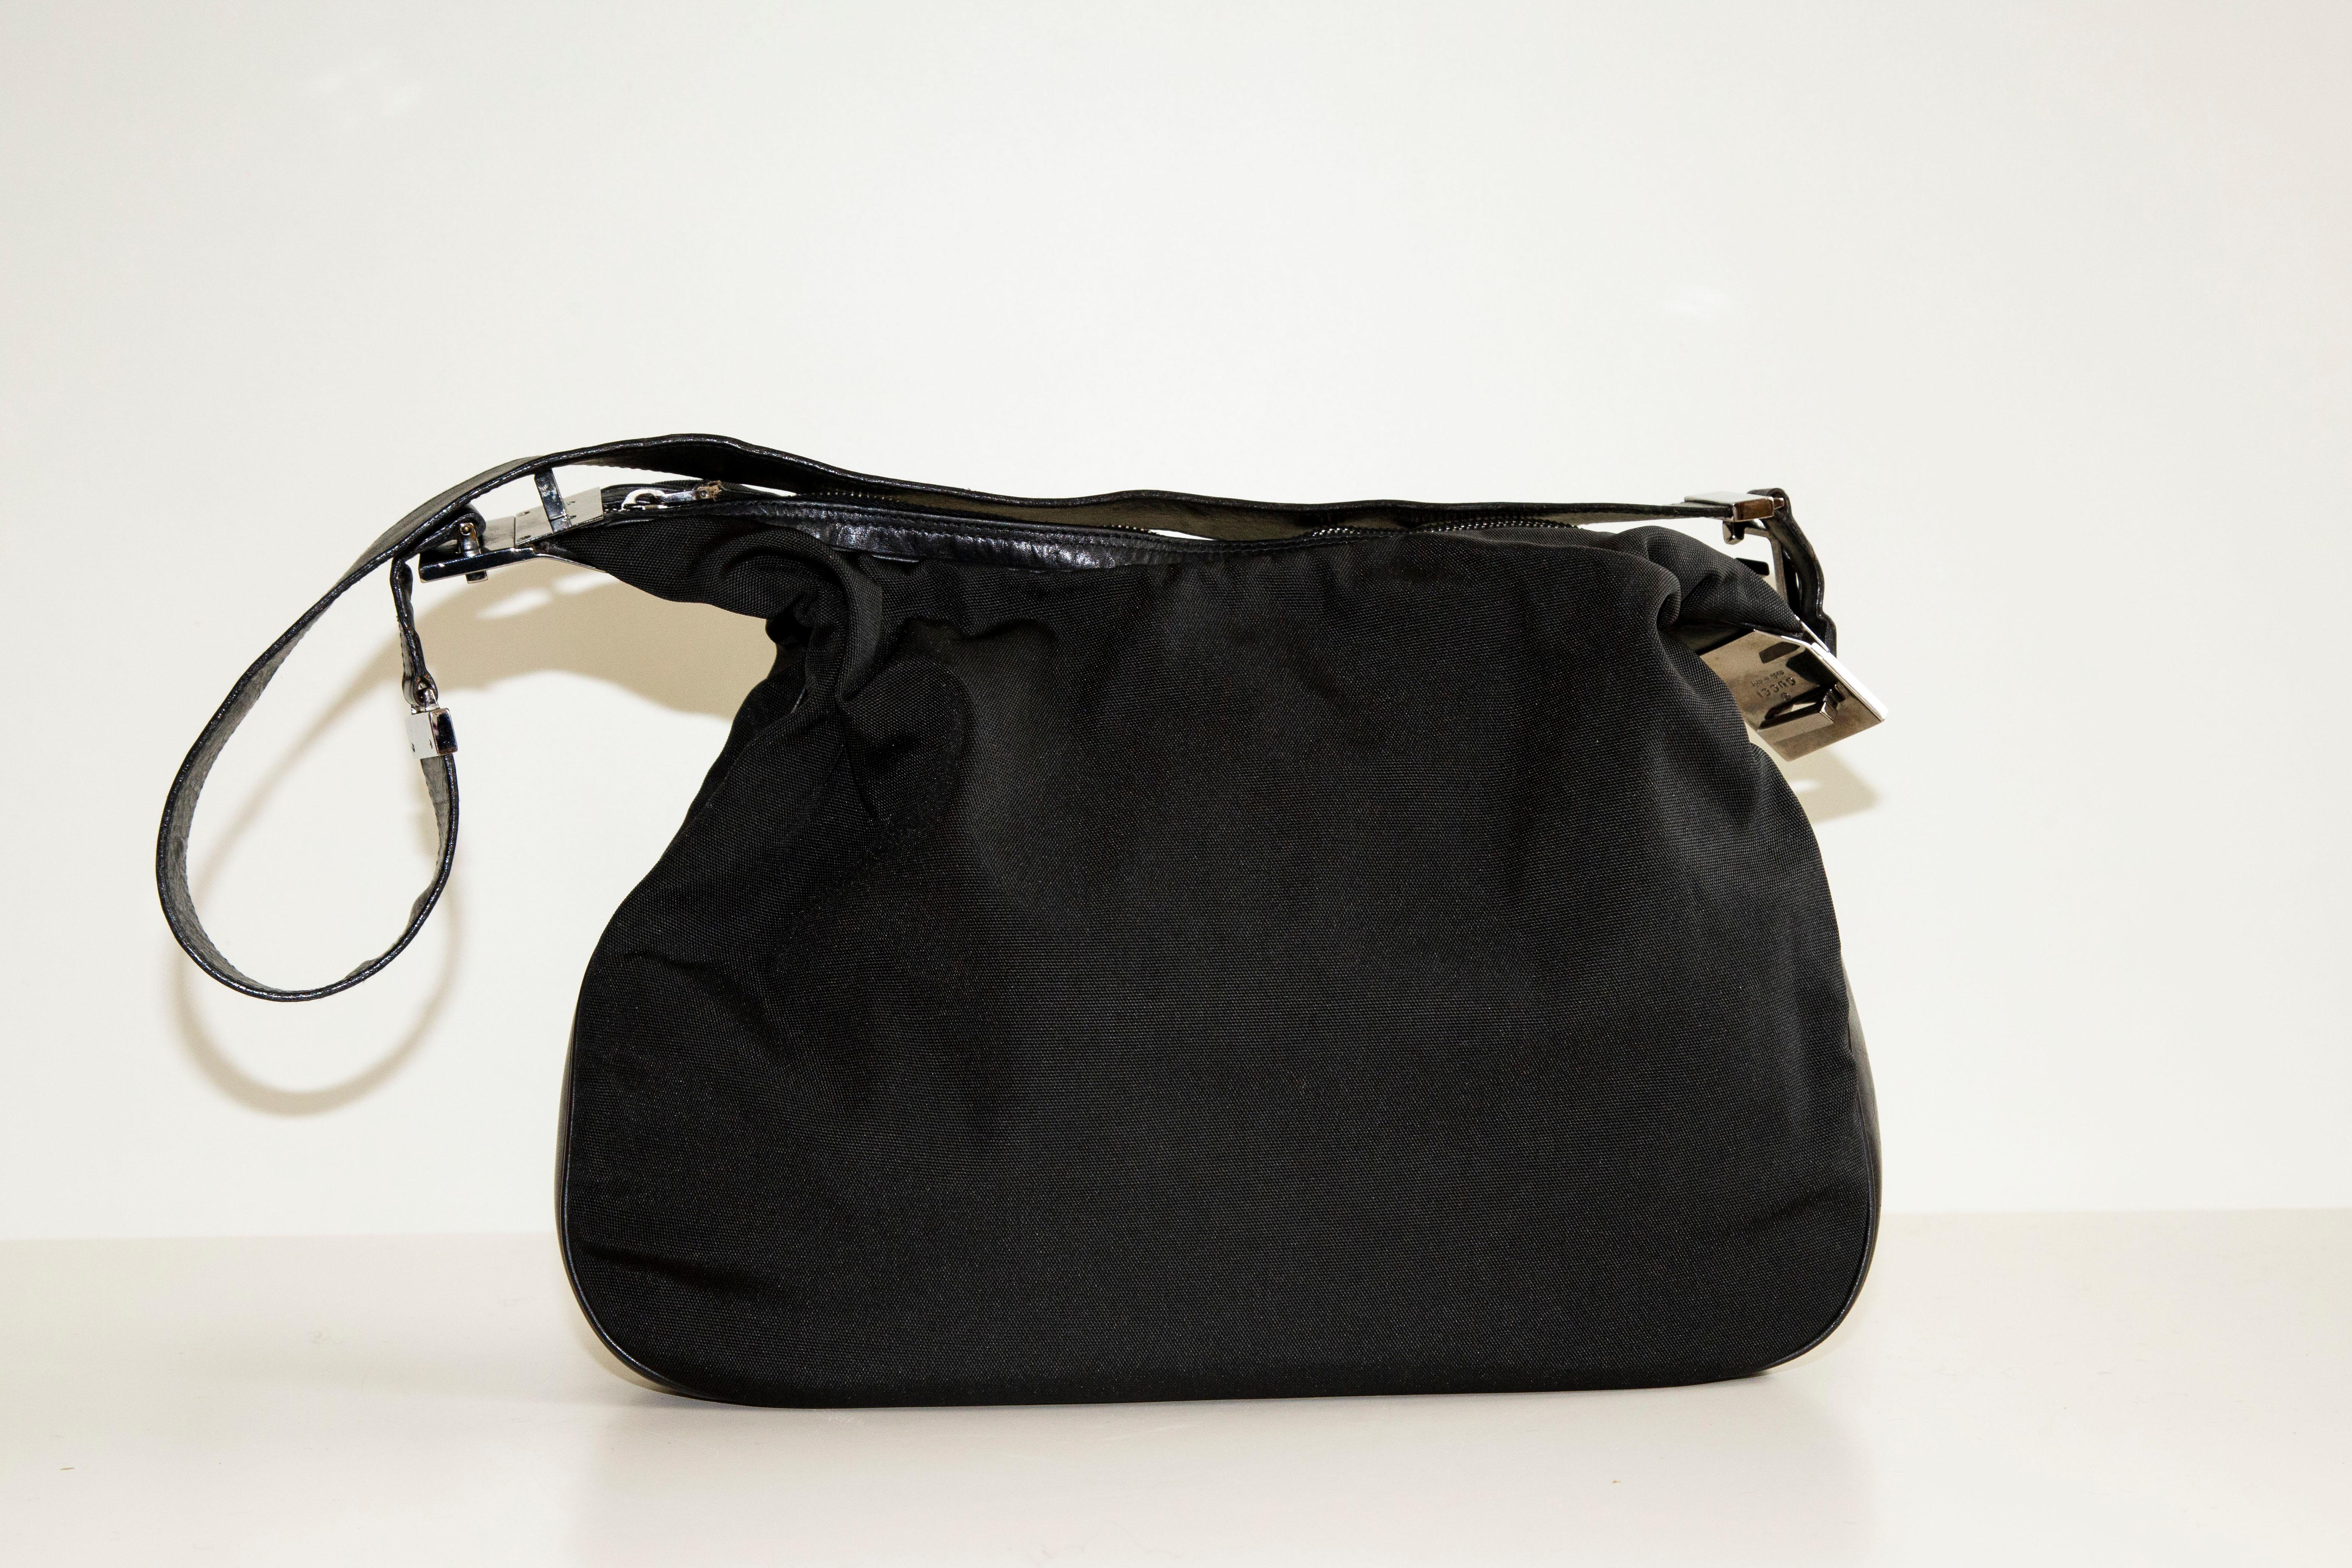 Gucci Attache Large Shoulder Bag in Black Fabric and Leather  1980s In Good Condition For Sale In Arnhem, NL